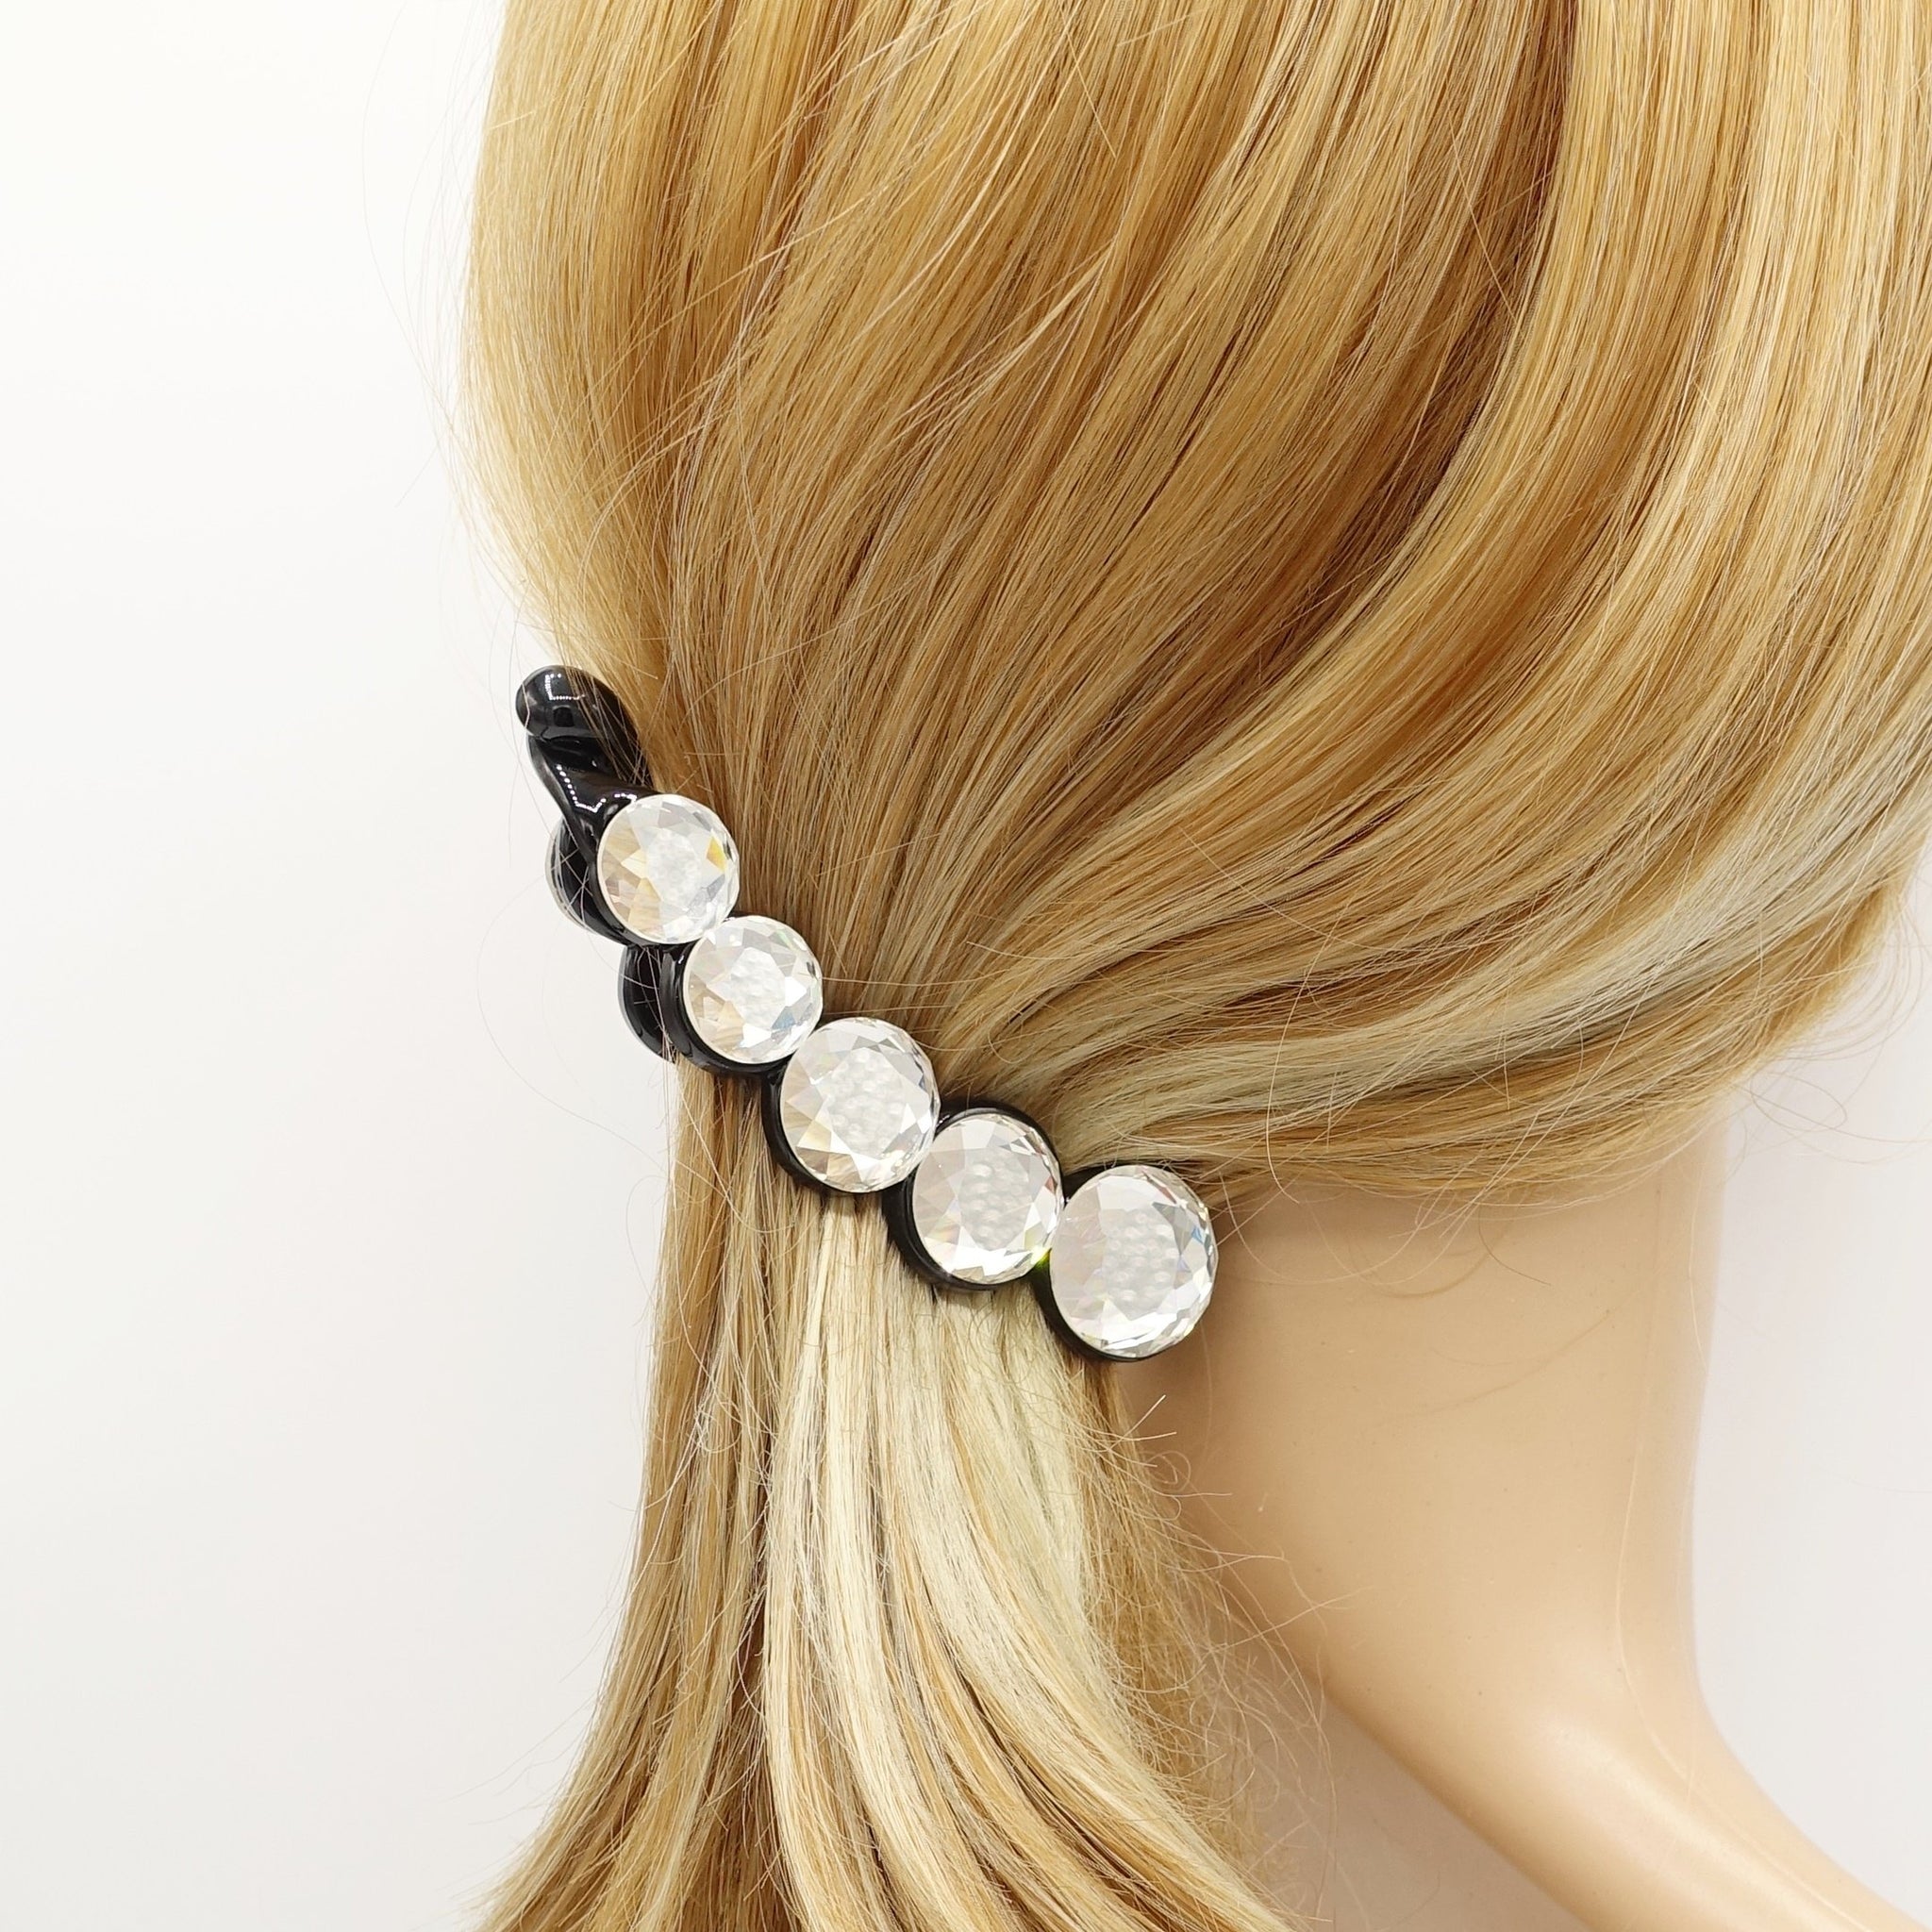 Glass Crystal Super Dazzling 5 Stones Gift Banana Hair Clip Accessories.